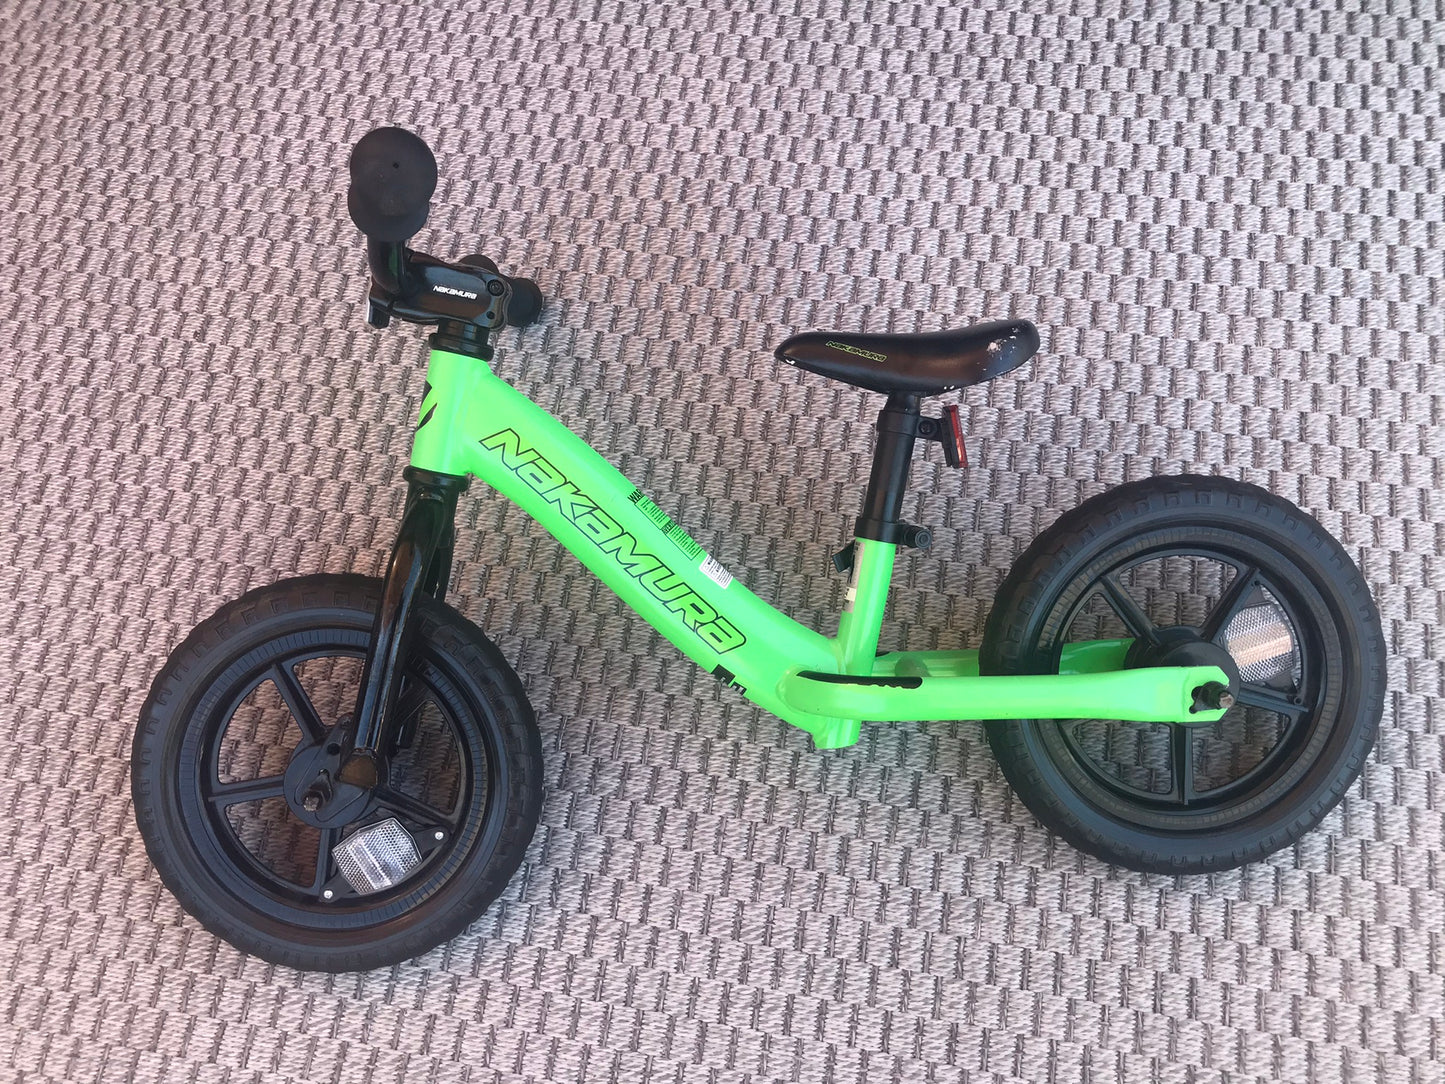 Nakamura Kids' 12 Balance Run Bike Foam Wheels Adjustable Height Lime and Black Excellent Condition